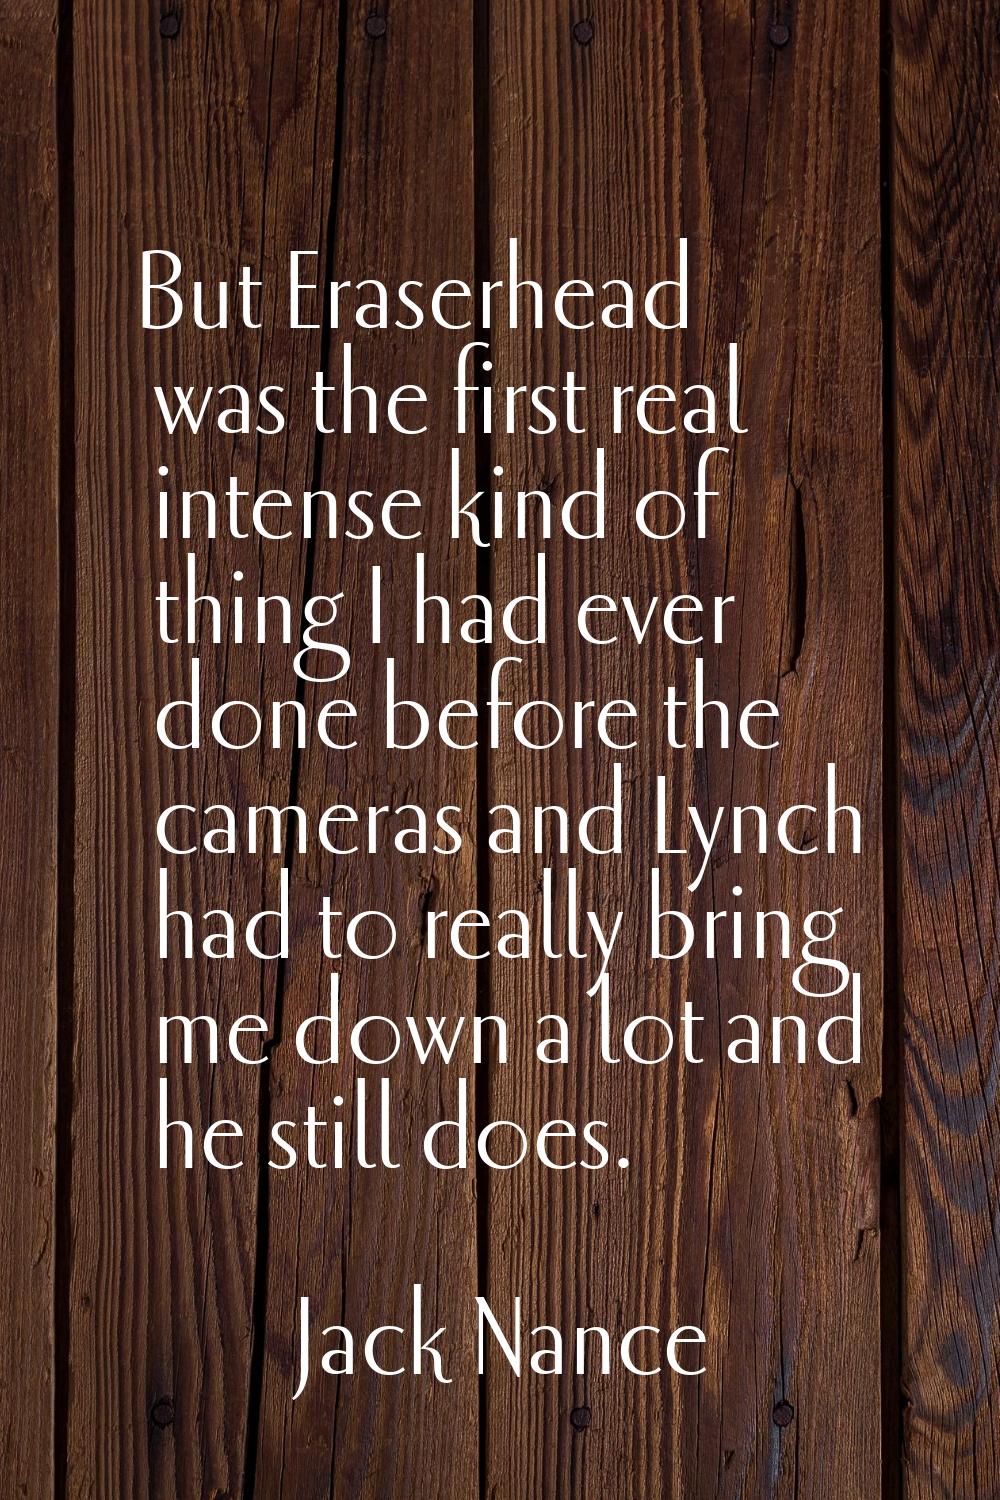 But Eraserhead was the first real intense kind of thing I had ever done before the cameras and Lync